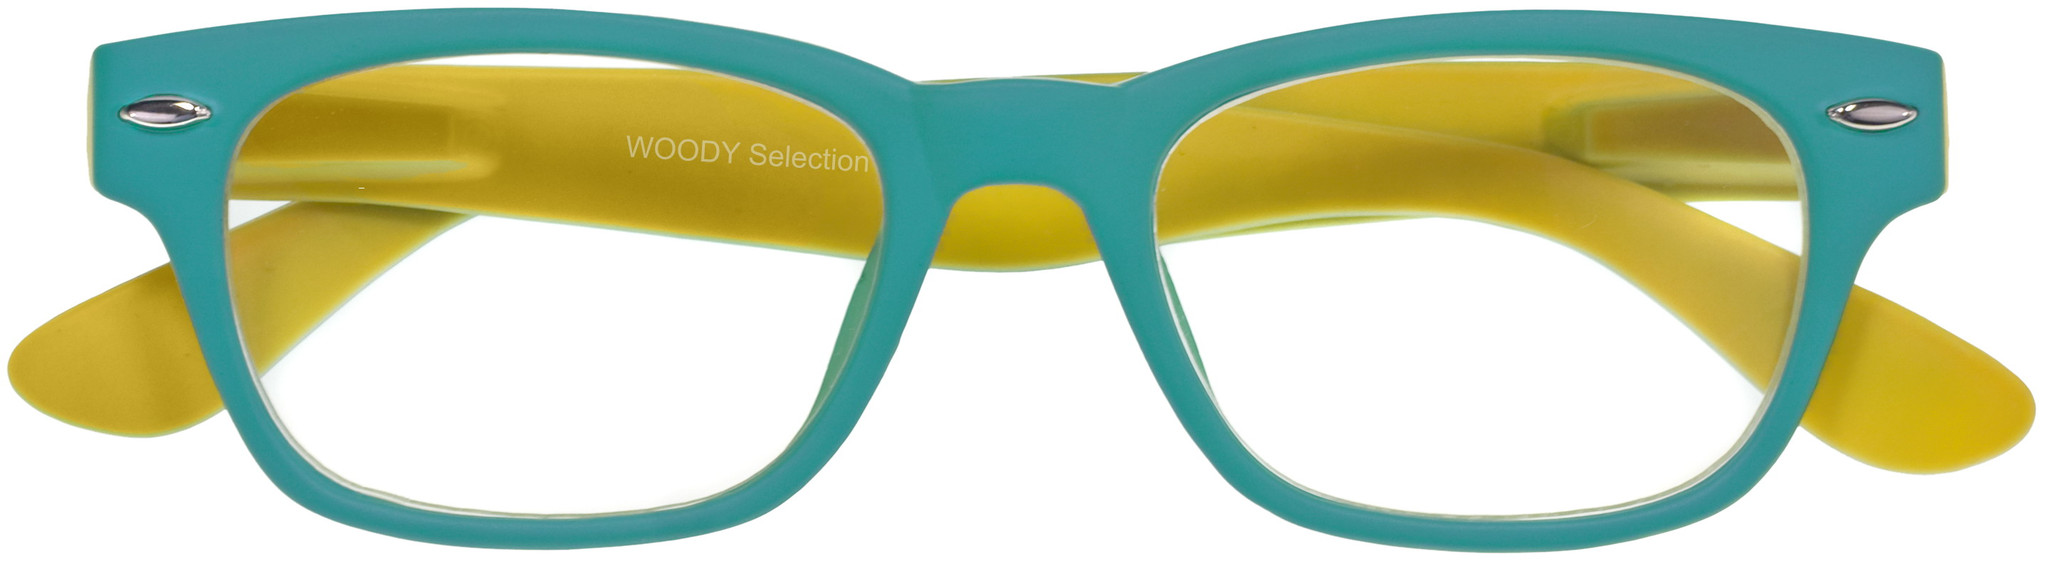 Woody Selection Turquoise-Yellow Readers by I Need You Readers